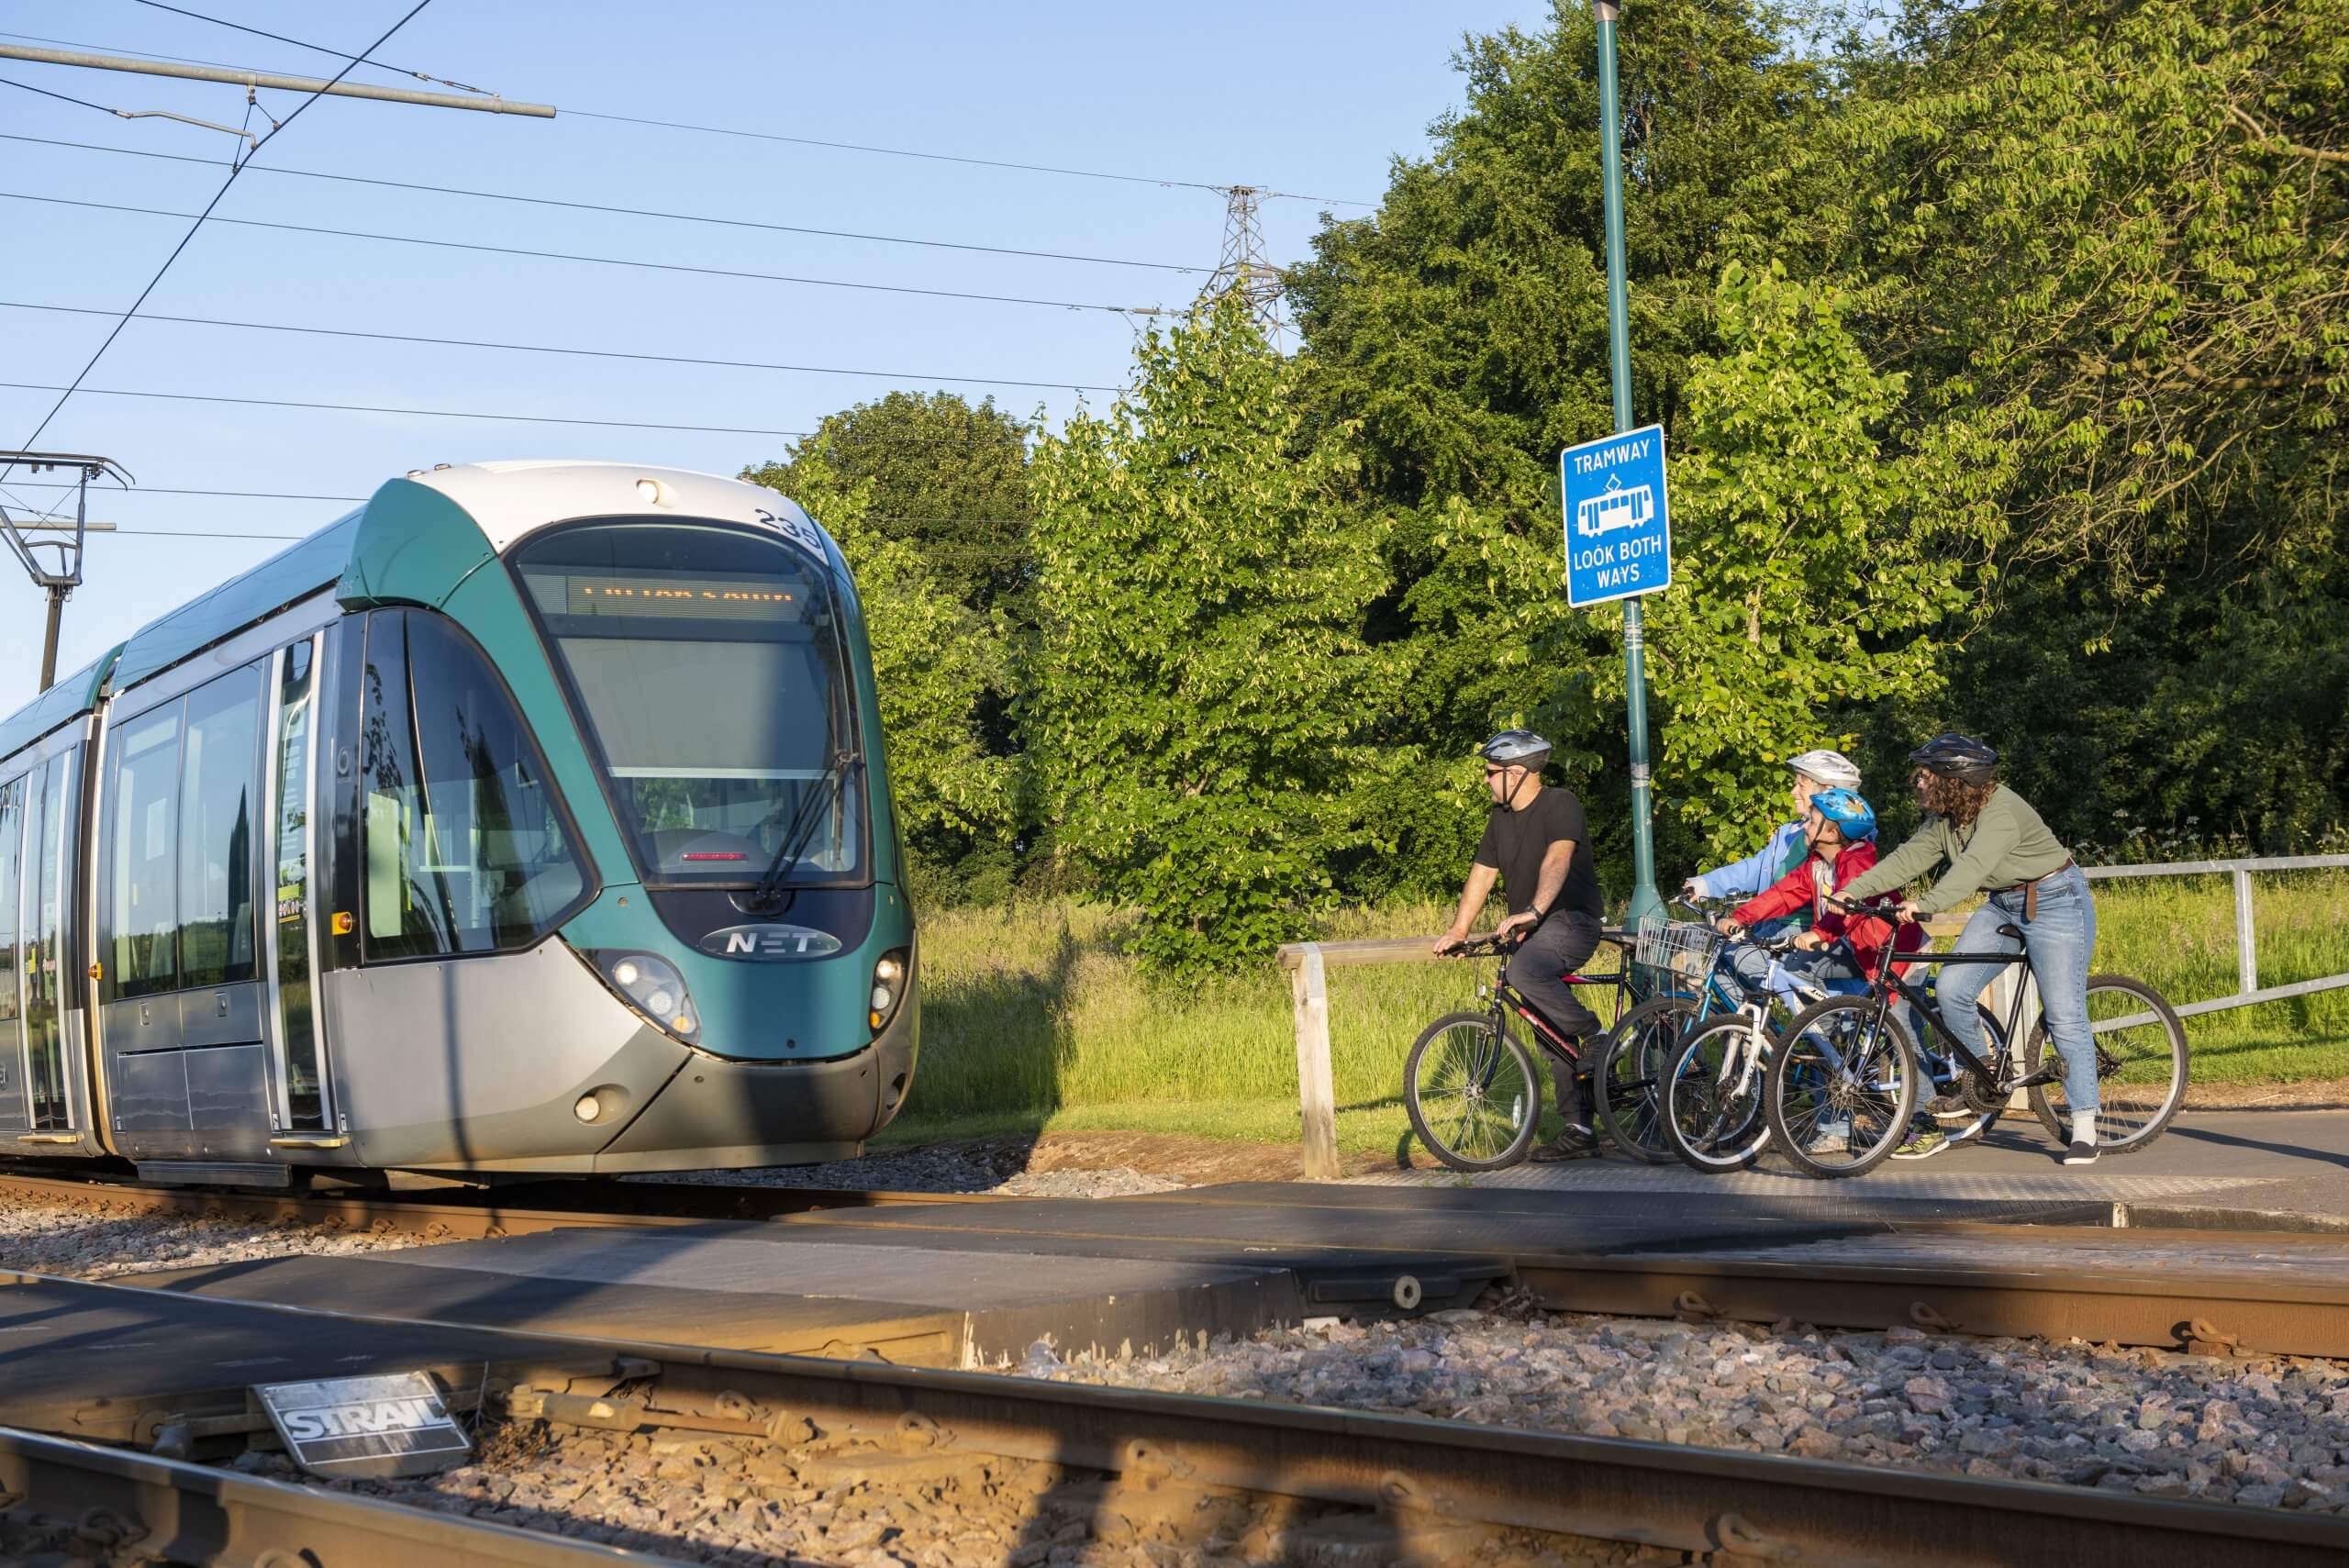 A family on bicycles wait for a tram to pass before crossing the tracks